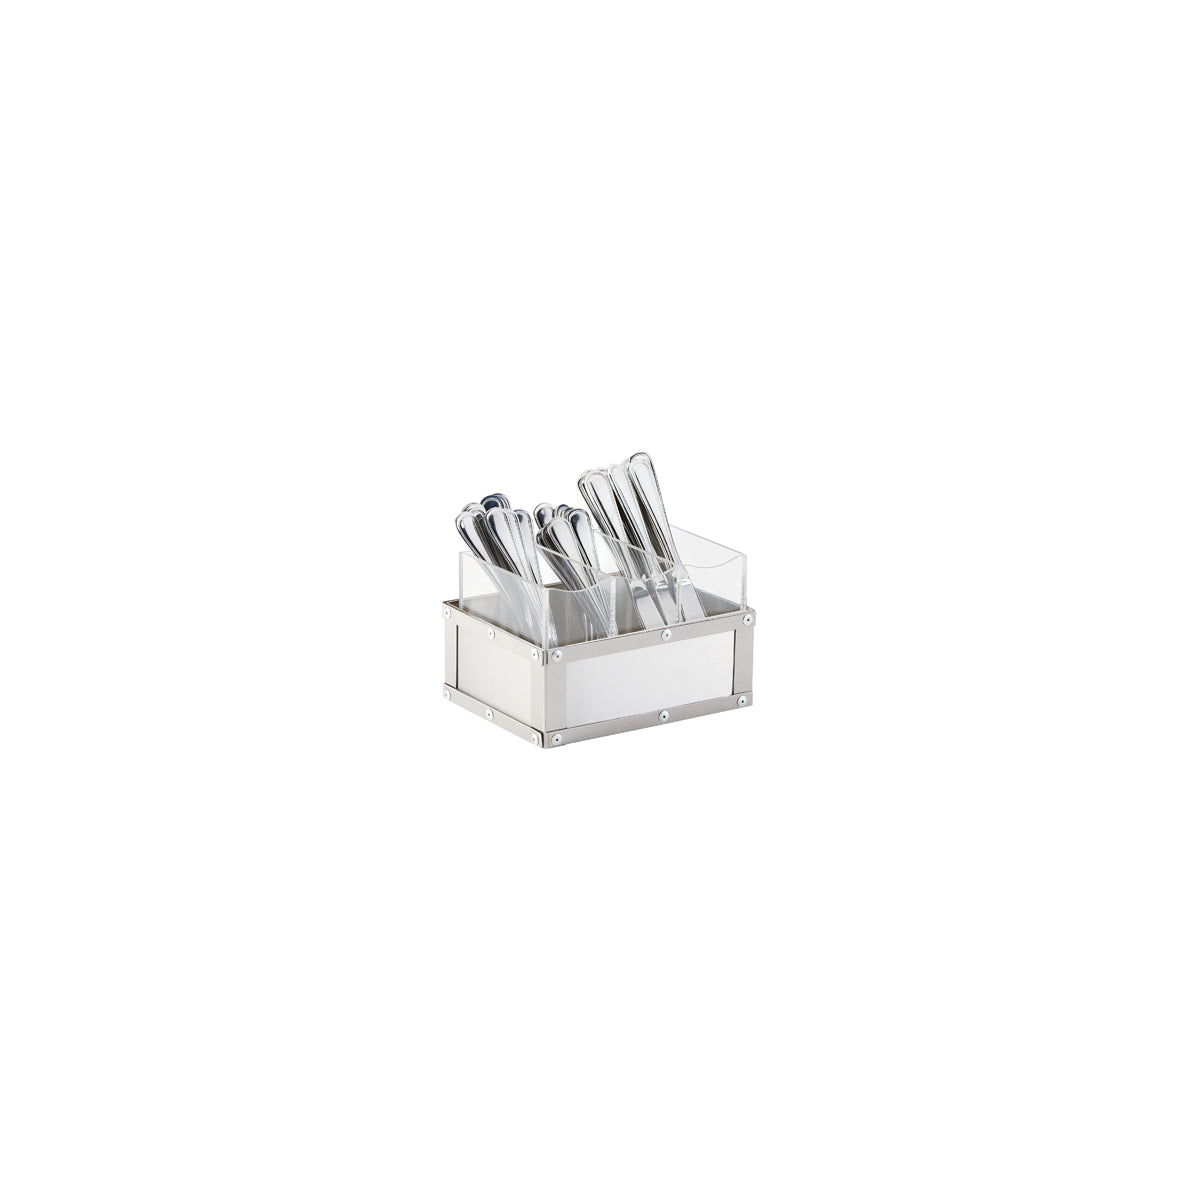 CM3408-55 Cal-Mil Urban Collection 3 Section Cutlery Holder 229x152x133mm Tomkin Australia Hospitality Supplies